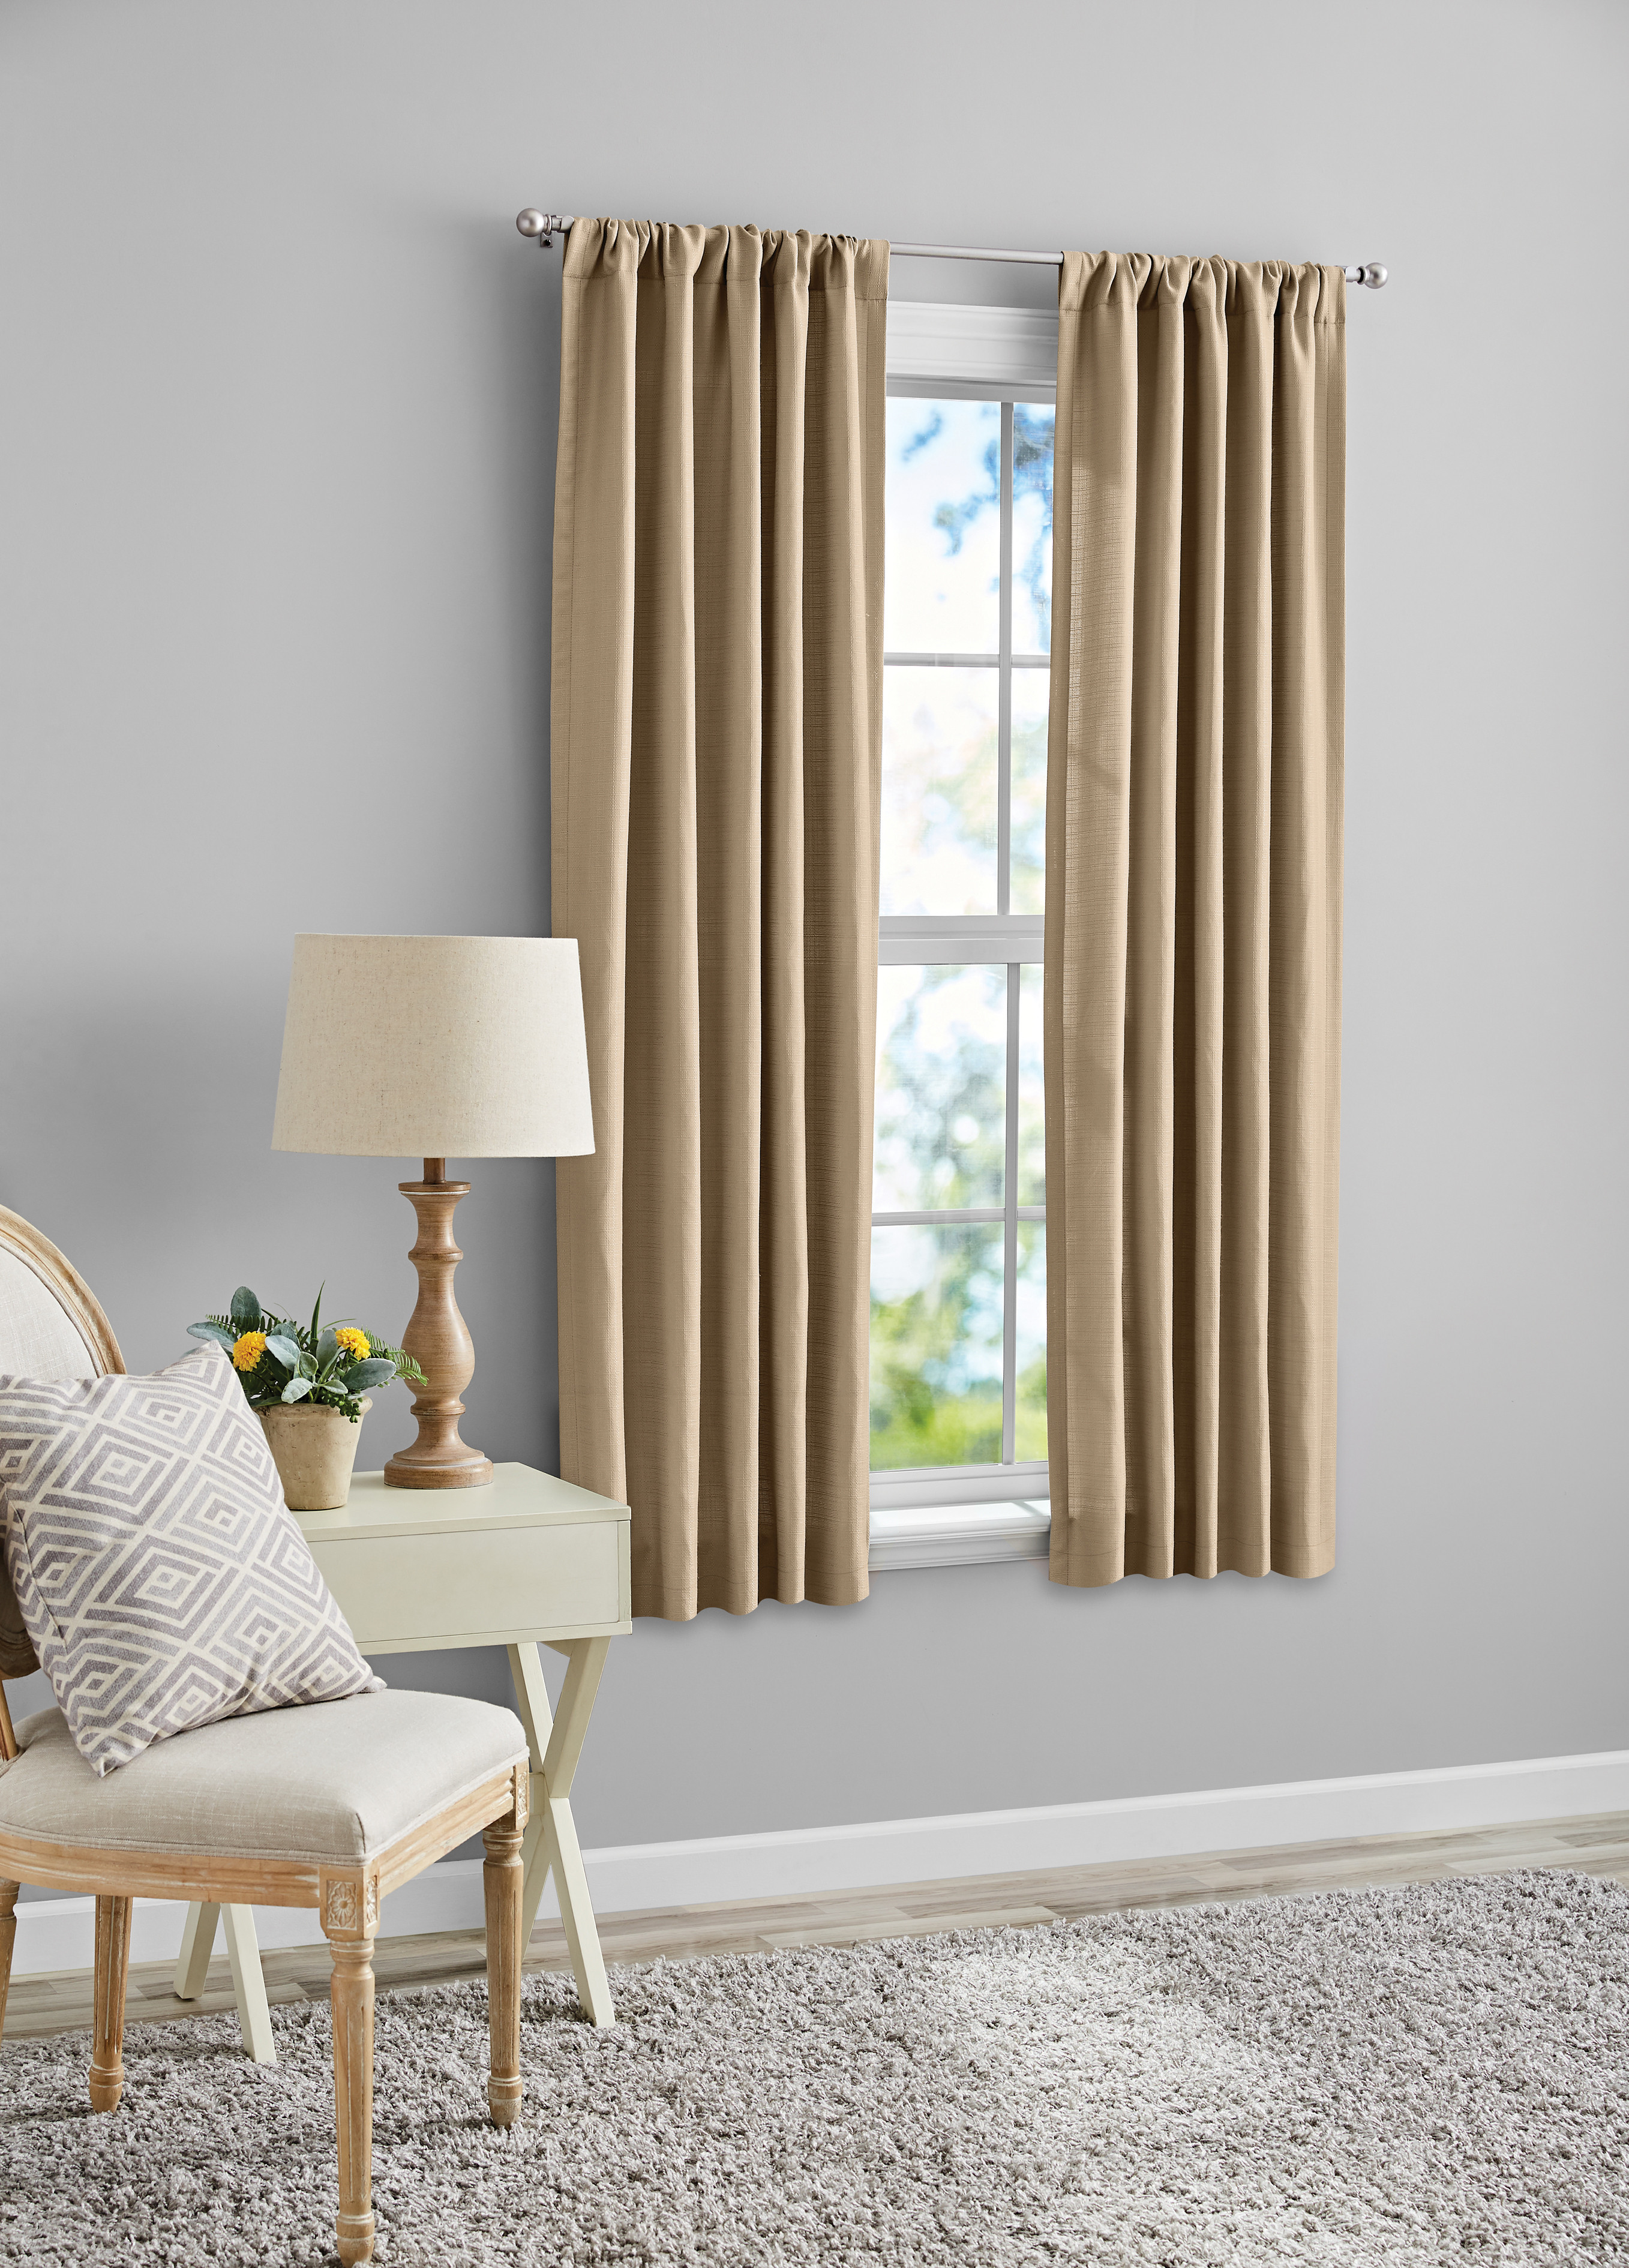 Mainstays Southport Beige Solid Color Light Filtering Rod Pocket Curtain Panel Pair, 40" x 63" - image 1 of 9